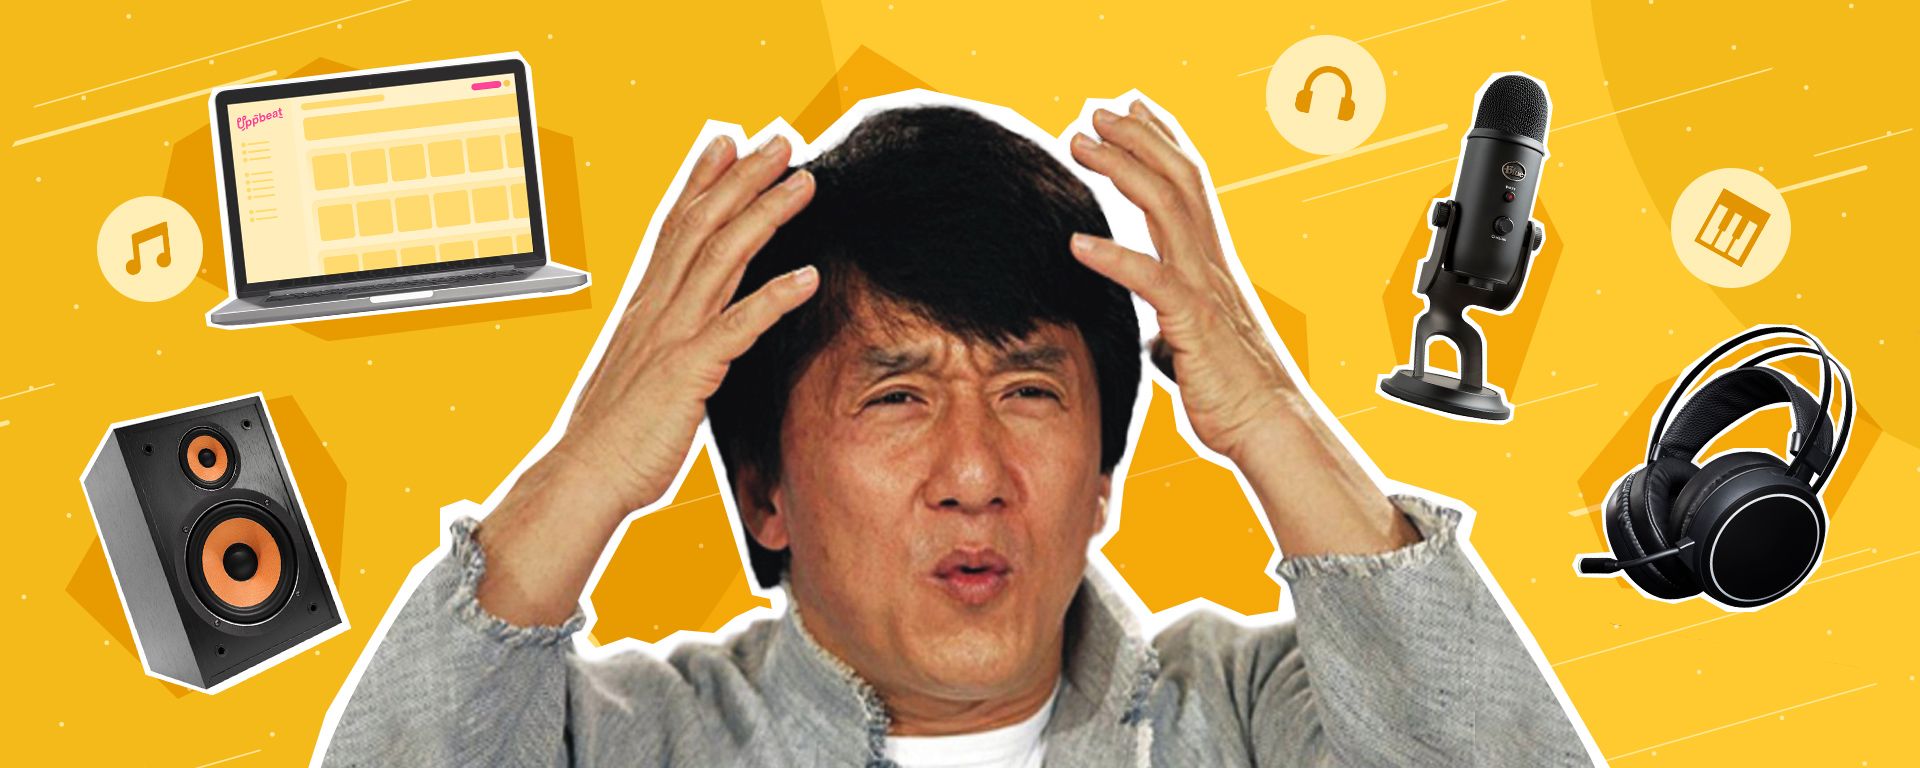 The Jackie Chan meme illustrating the confusion around royalty-free music